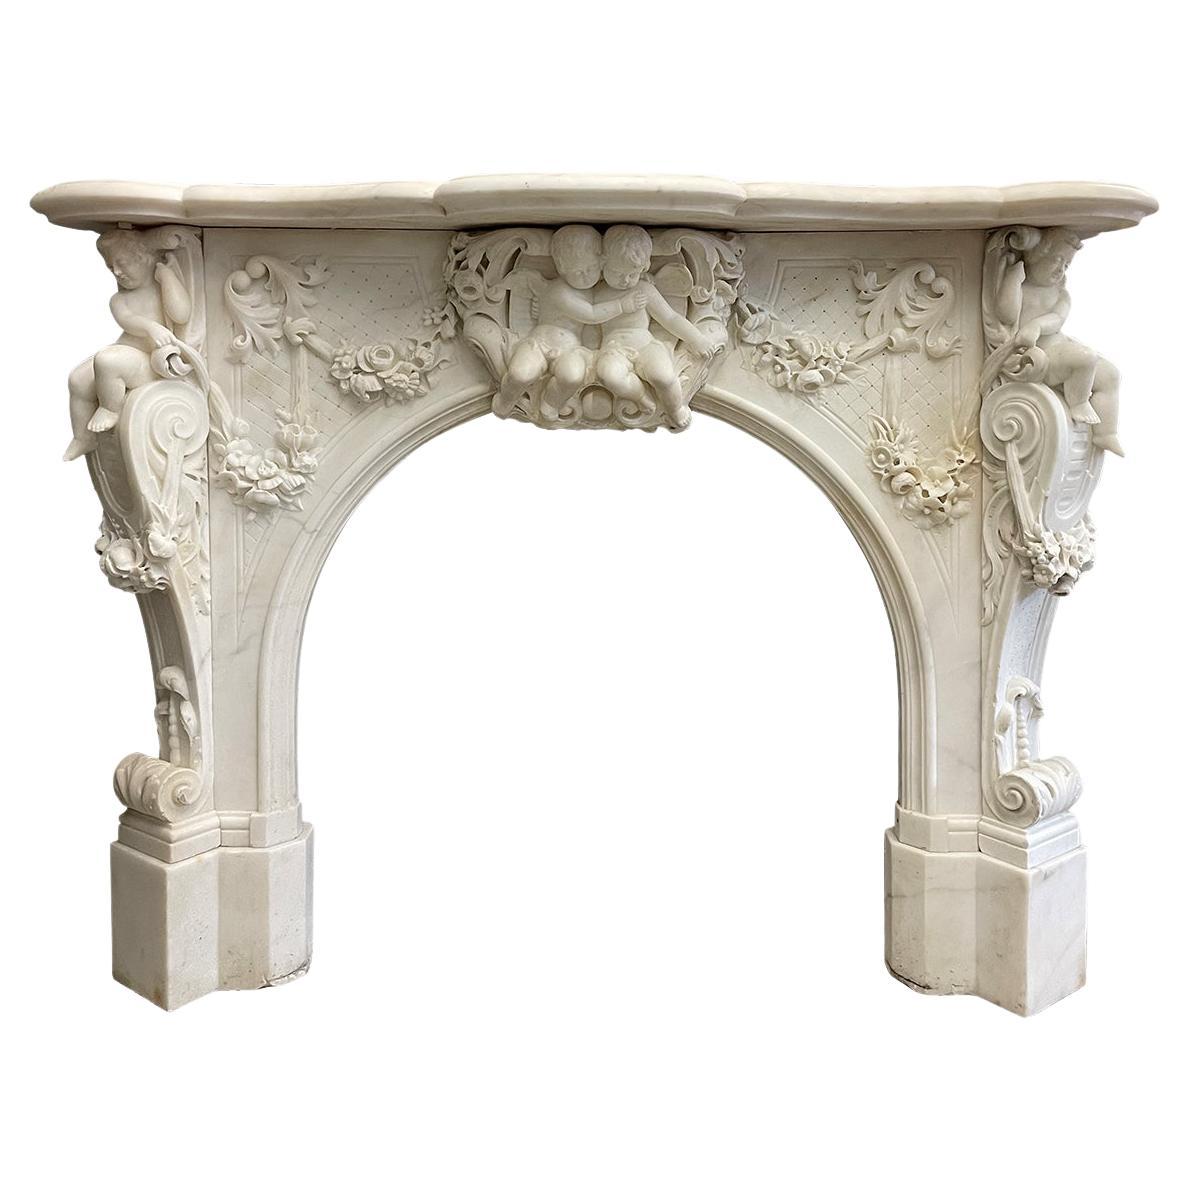 Antique Italian Statuary White Marble Baroque Style Fireplace Mantel For Sale